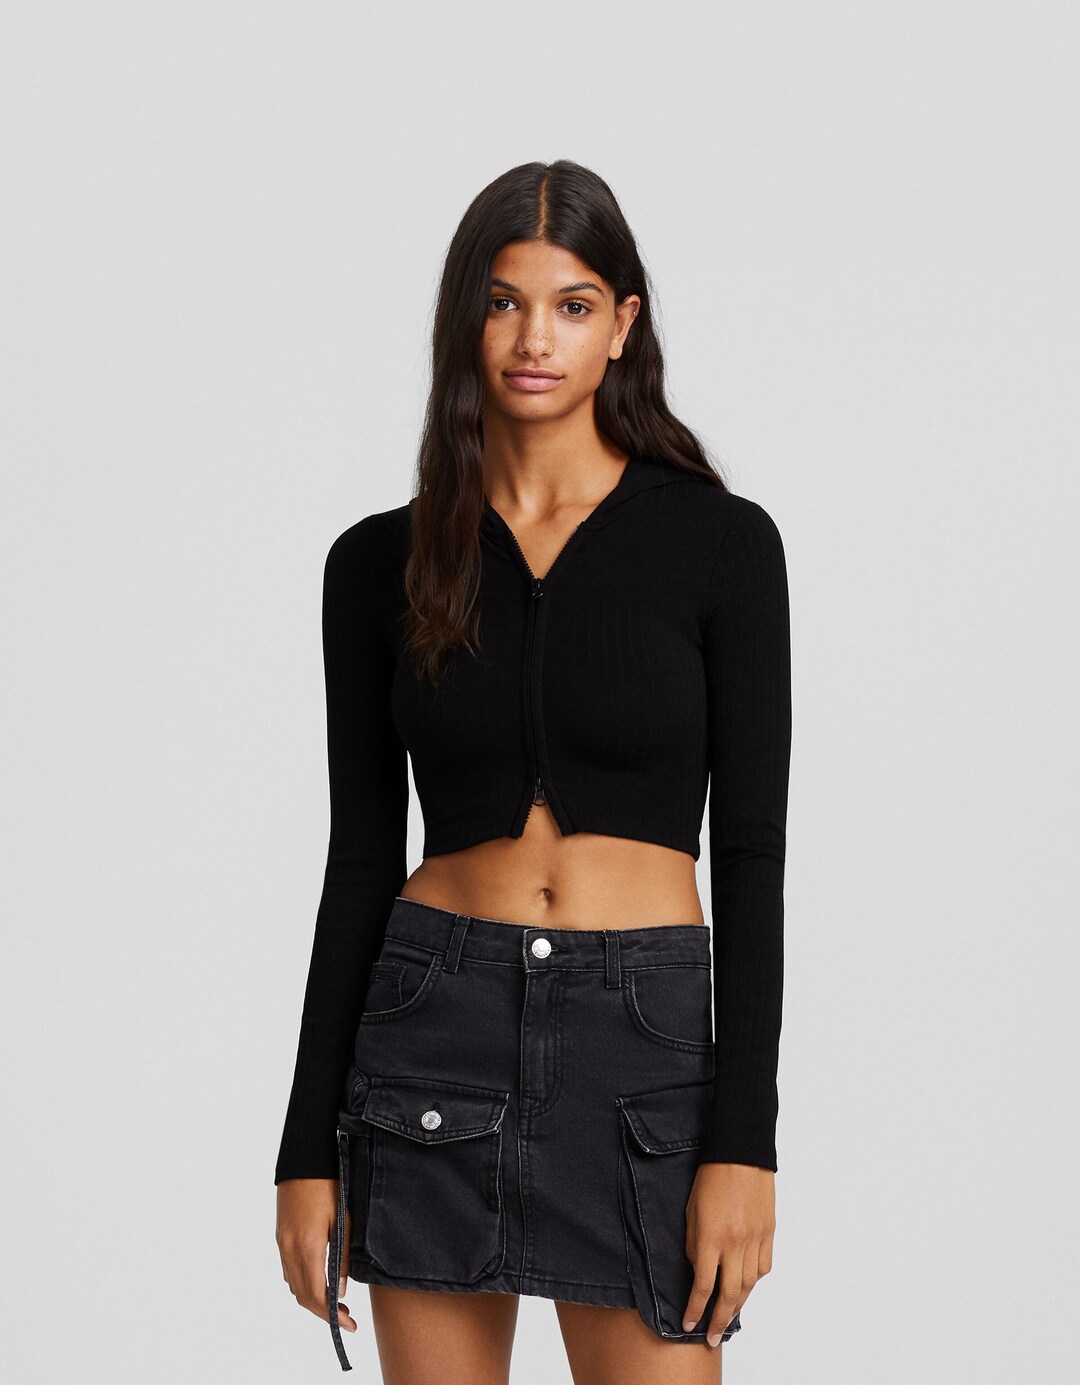 Women’s Sweaters and Knitwear | New Collection | BERSHKA